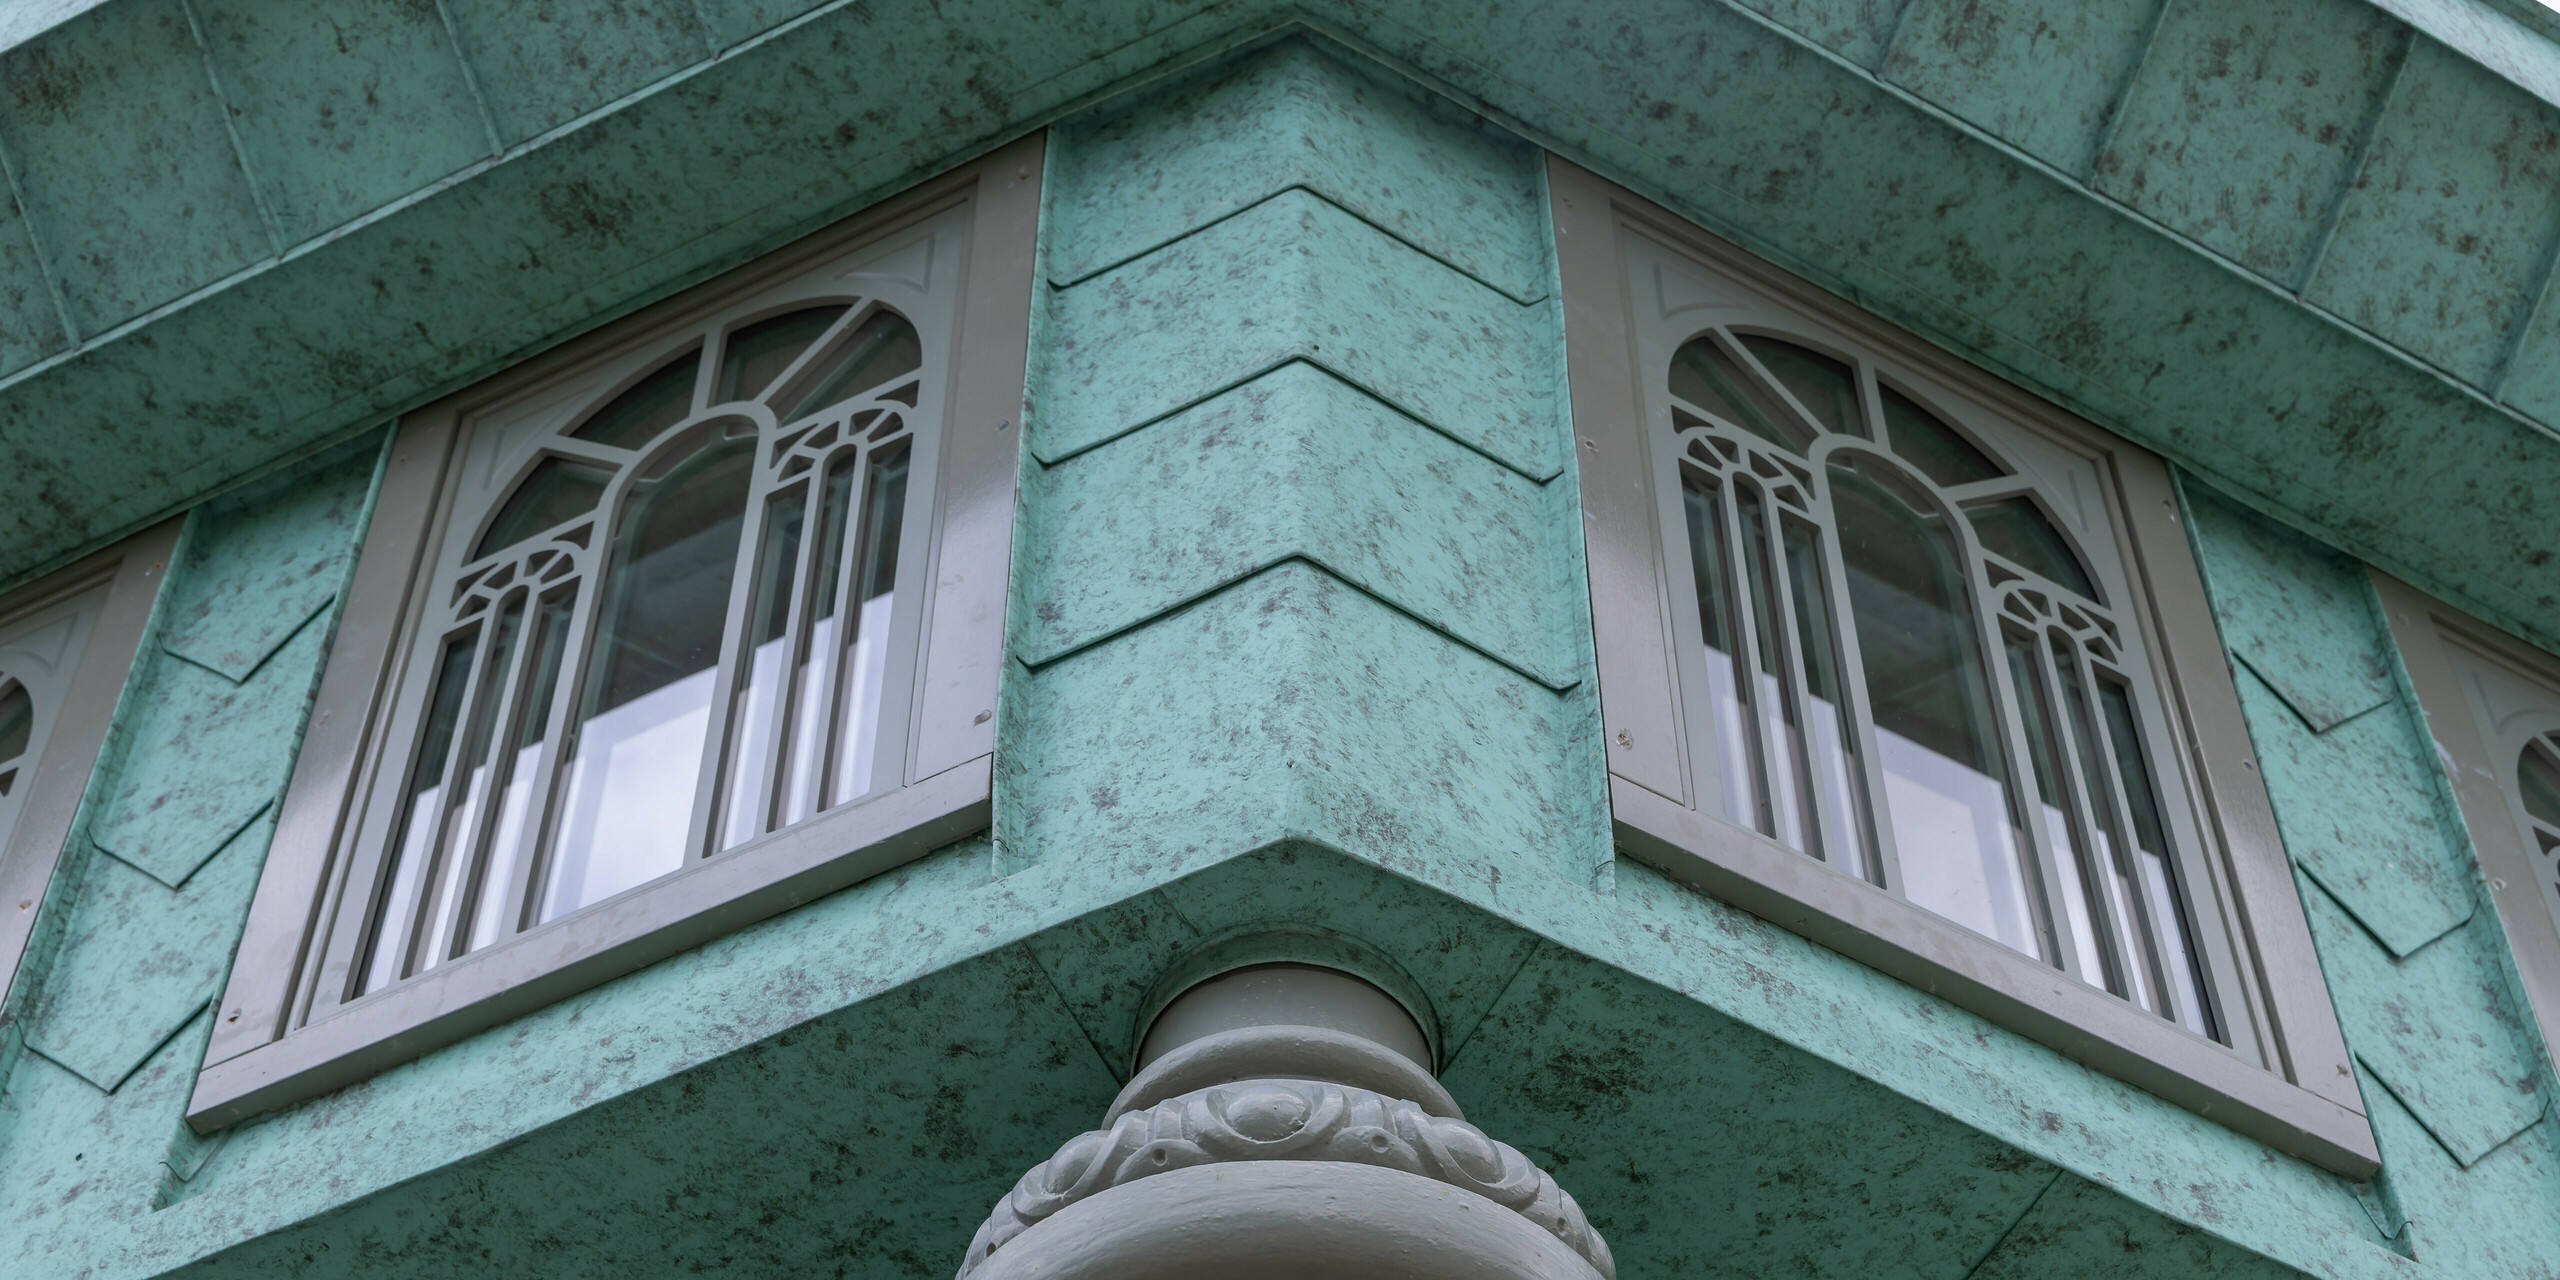 Close-up of a summerhouse with a facade made of PREFALZ in P.10 patina green